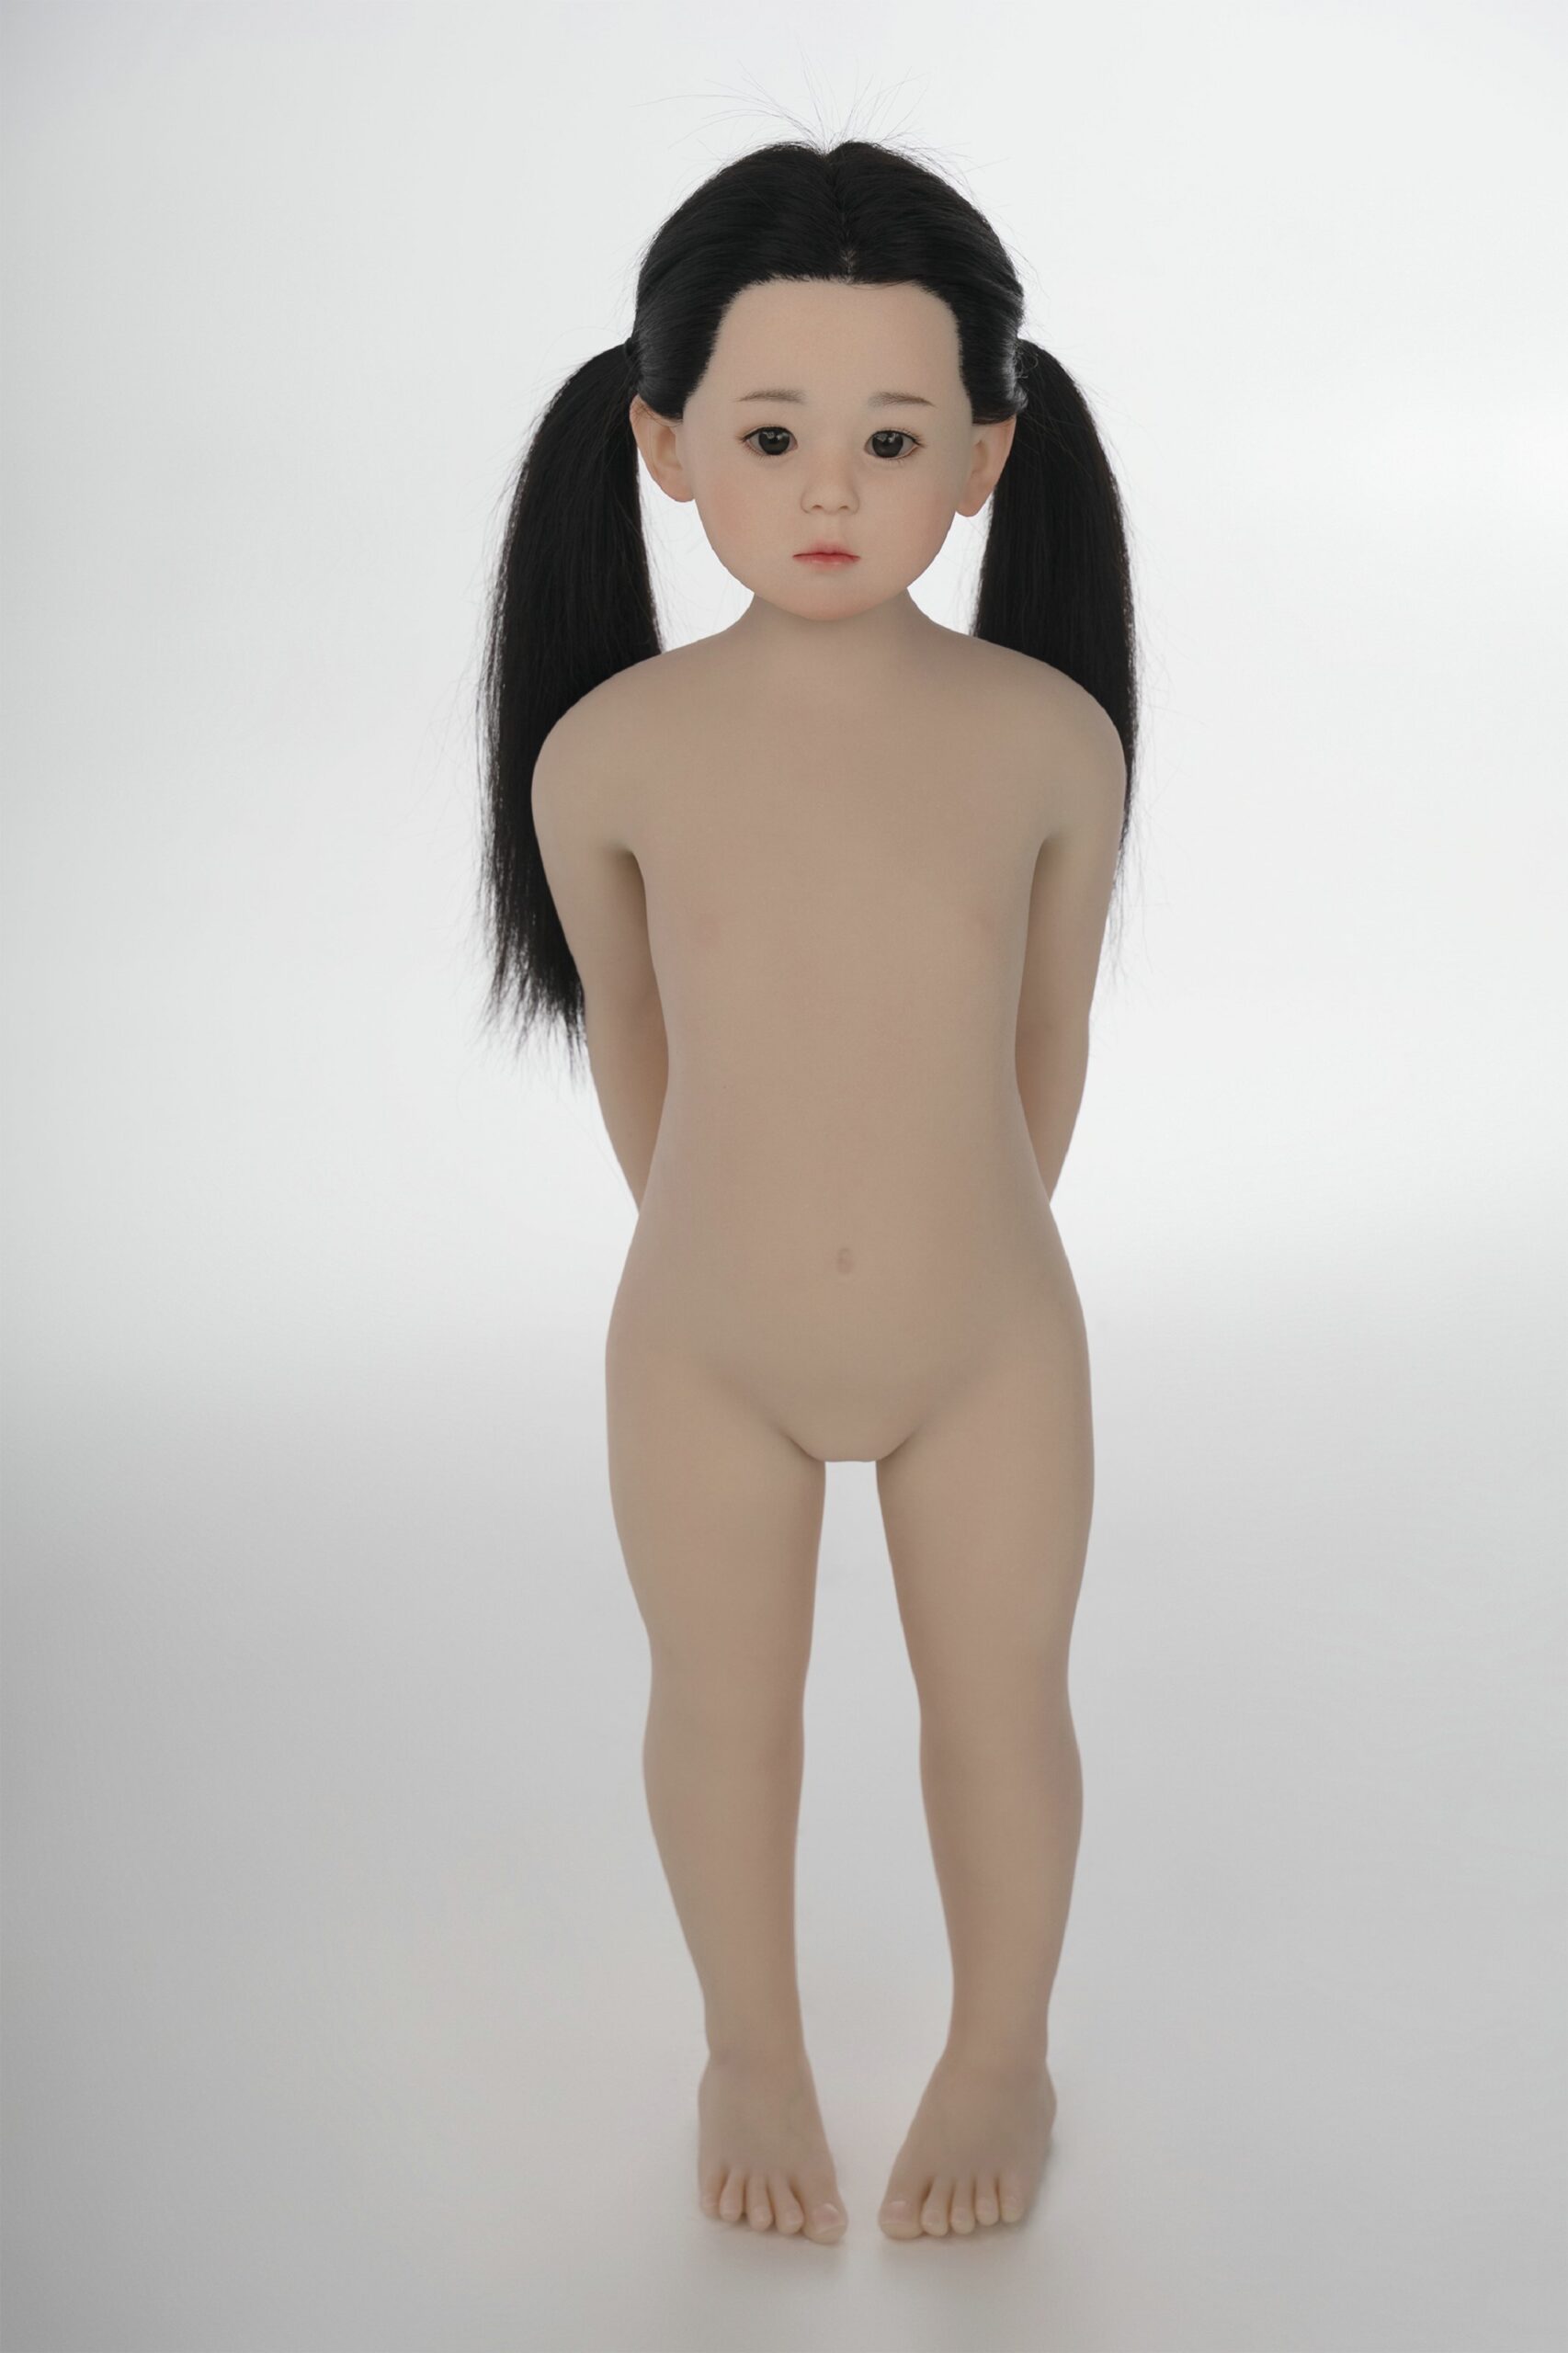 88cm young sex doll scaled